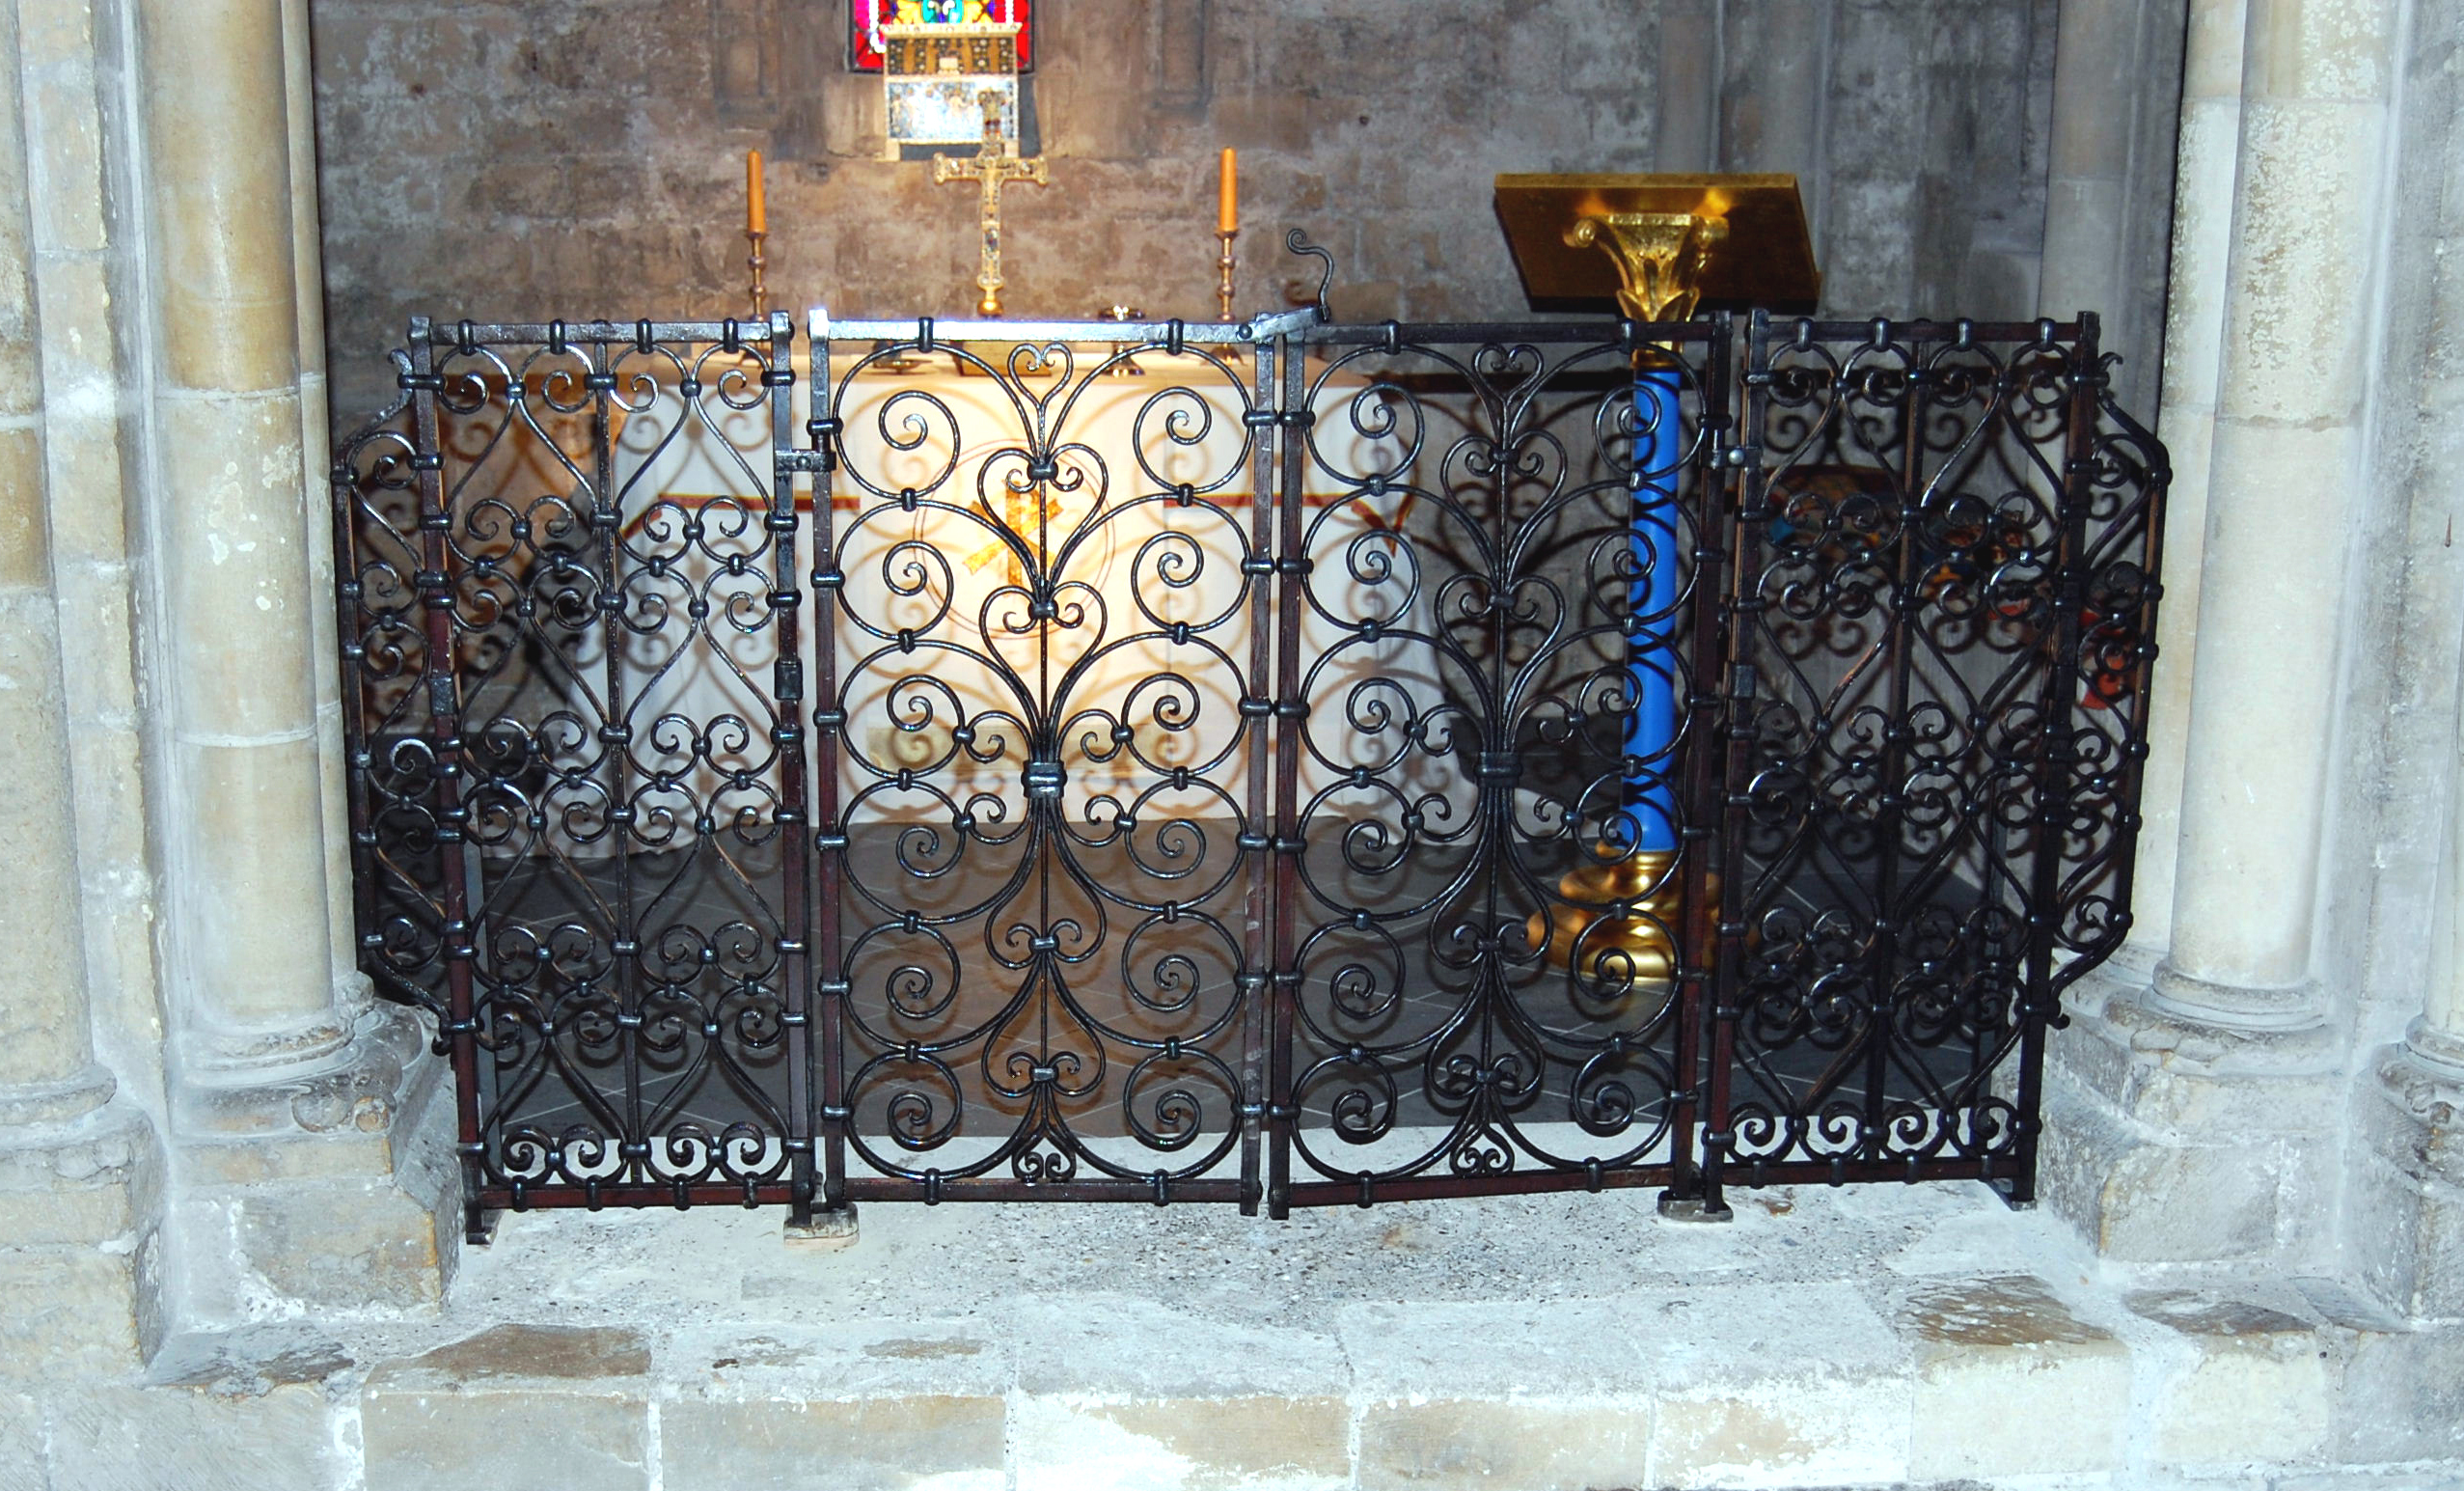 Kings Chapel Grills And gates3